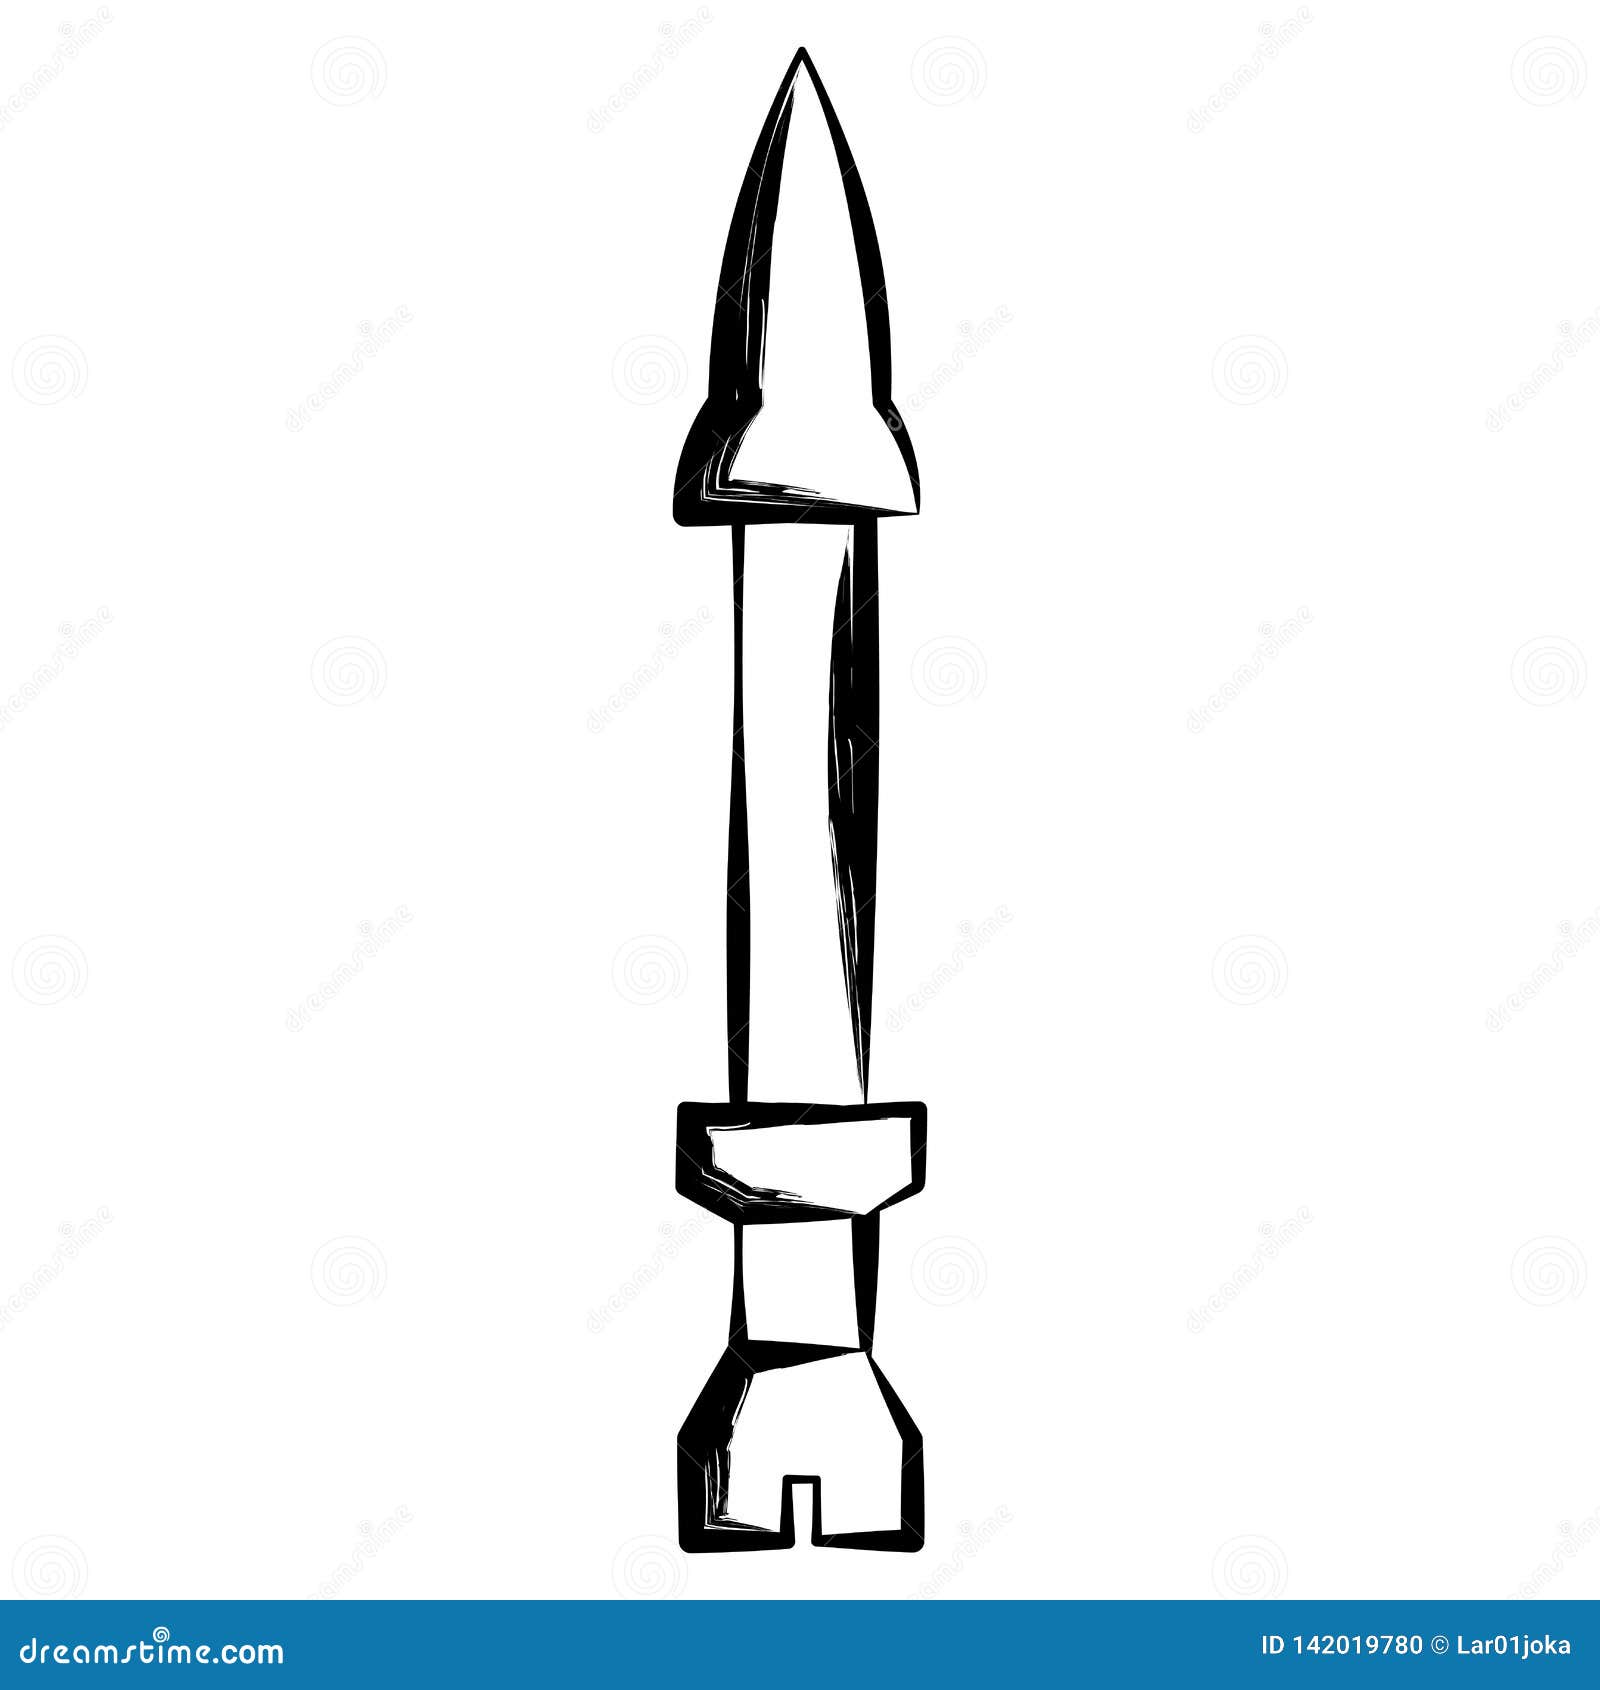 Isolated Sketch of a Missile Stock Vector - Illustration of object